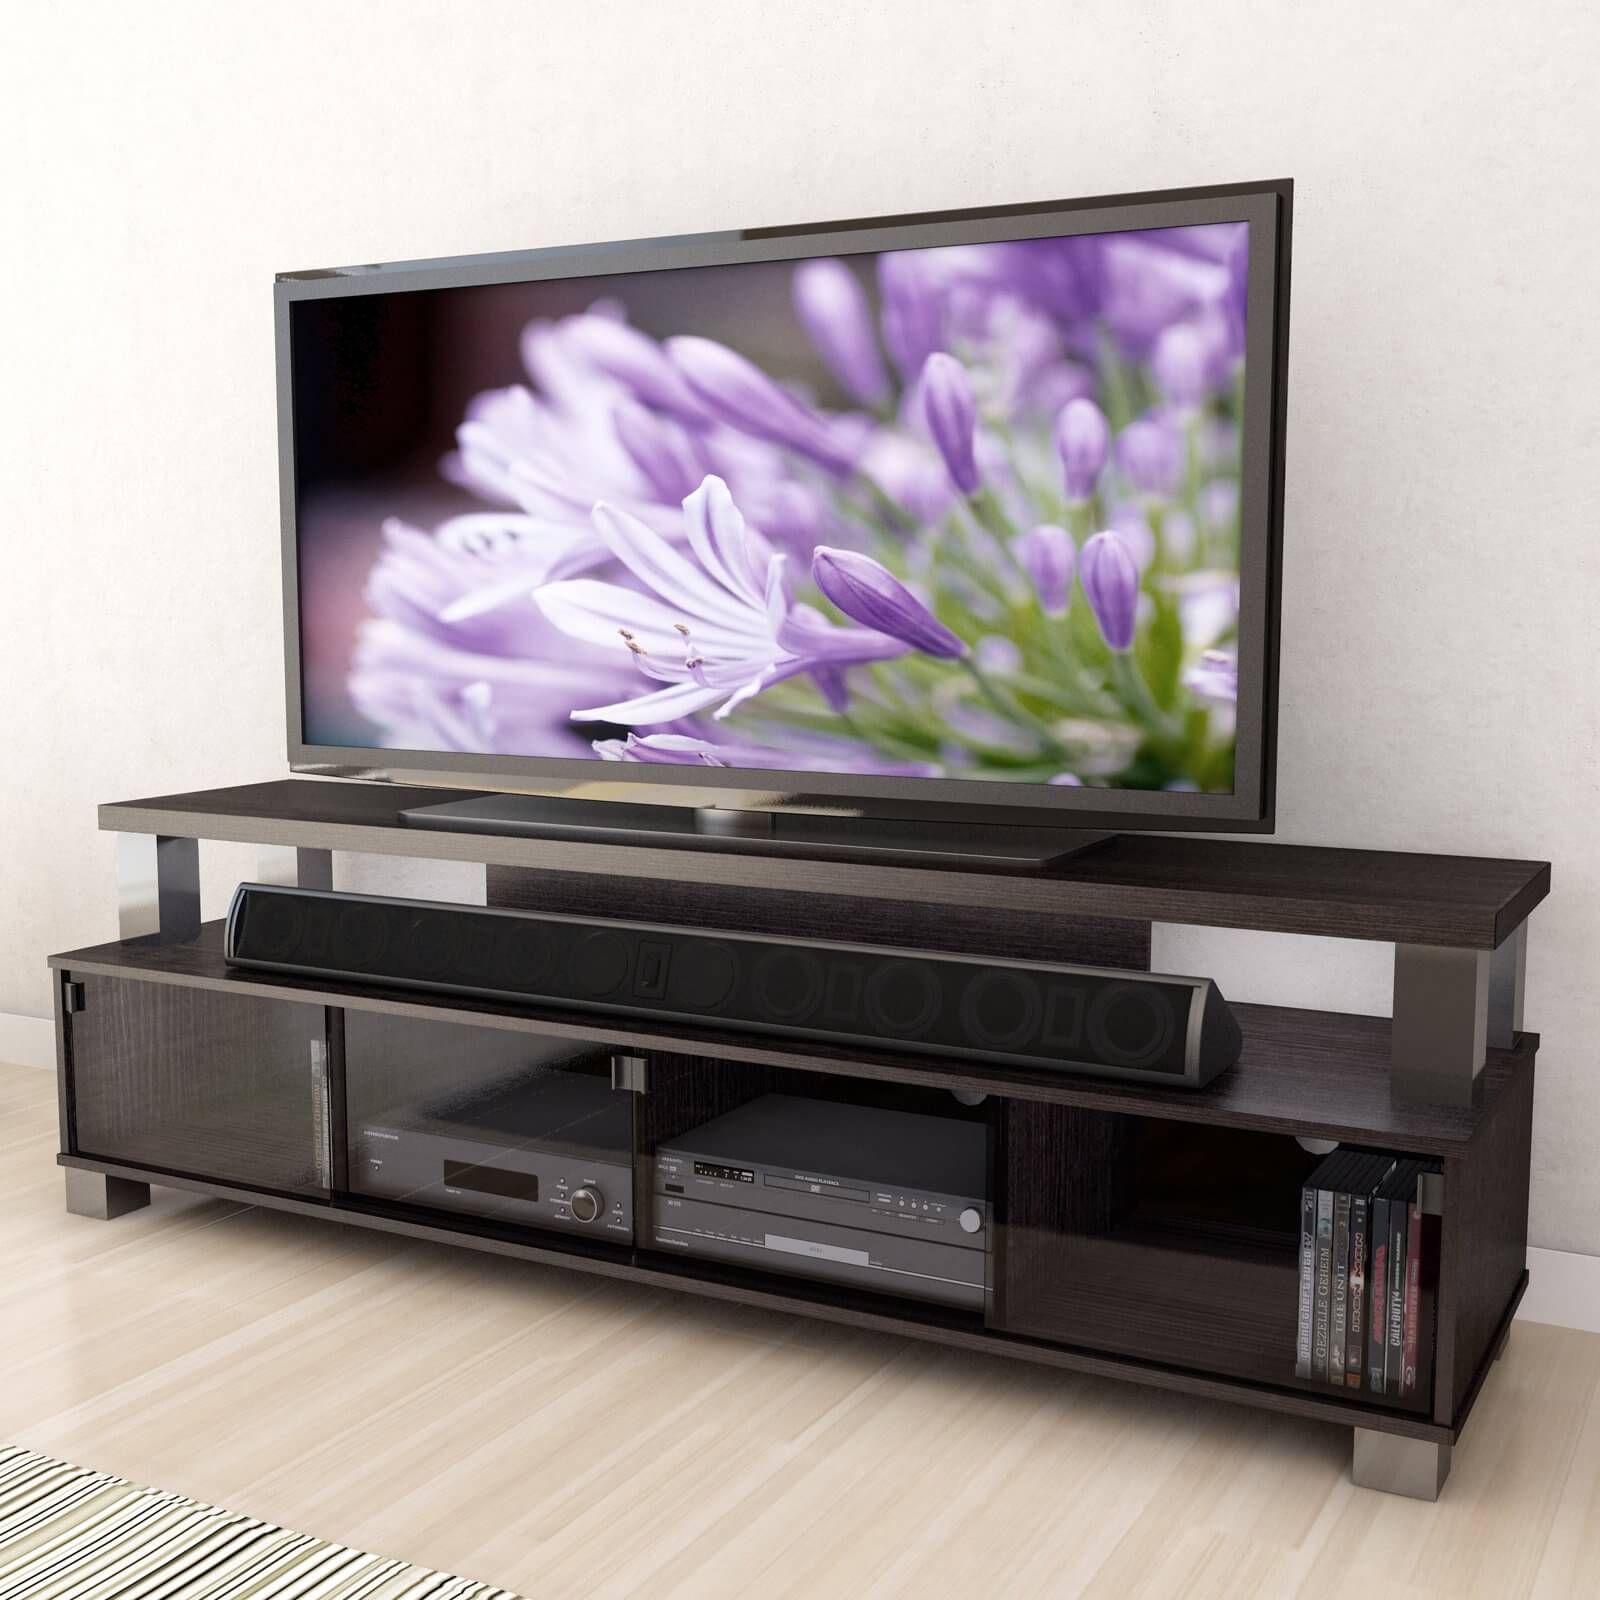 16 Types Of Tv Stands (comprehensive Buying Guide) With Contemporary Tv Stands (View 13 of 15)